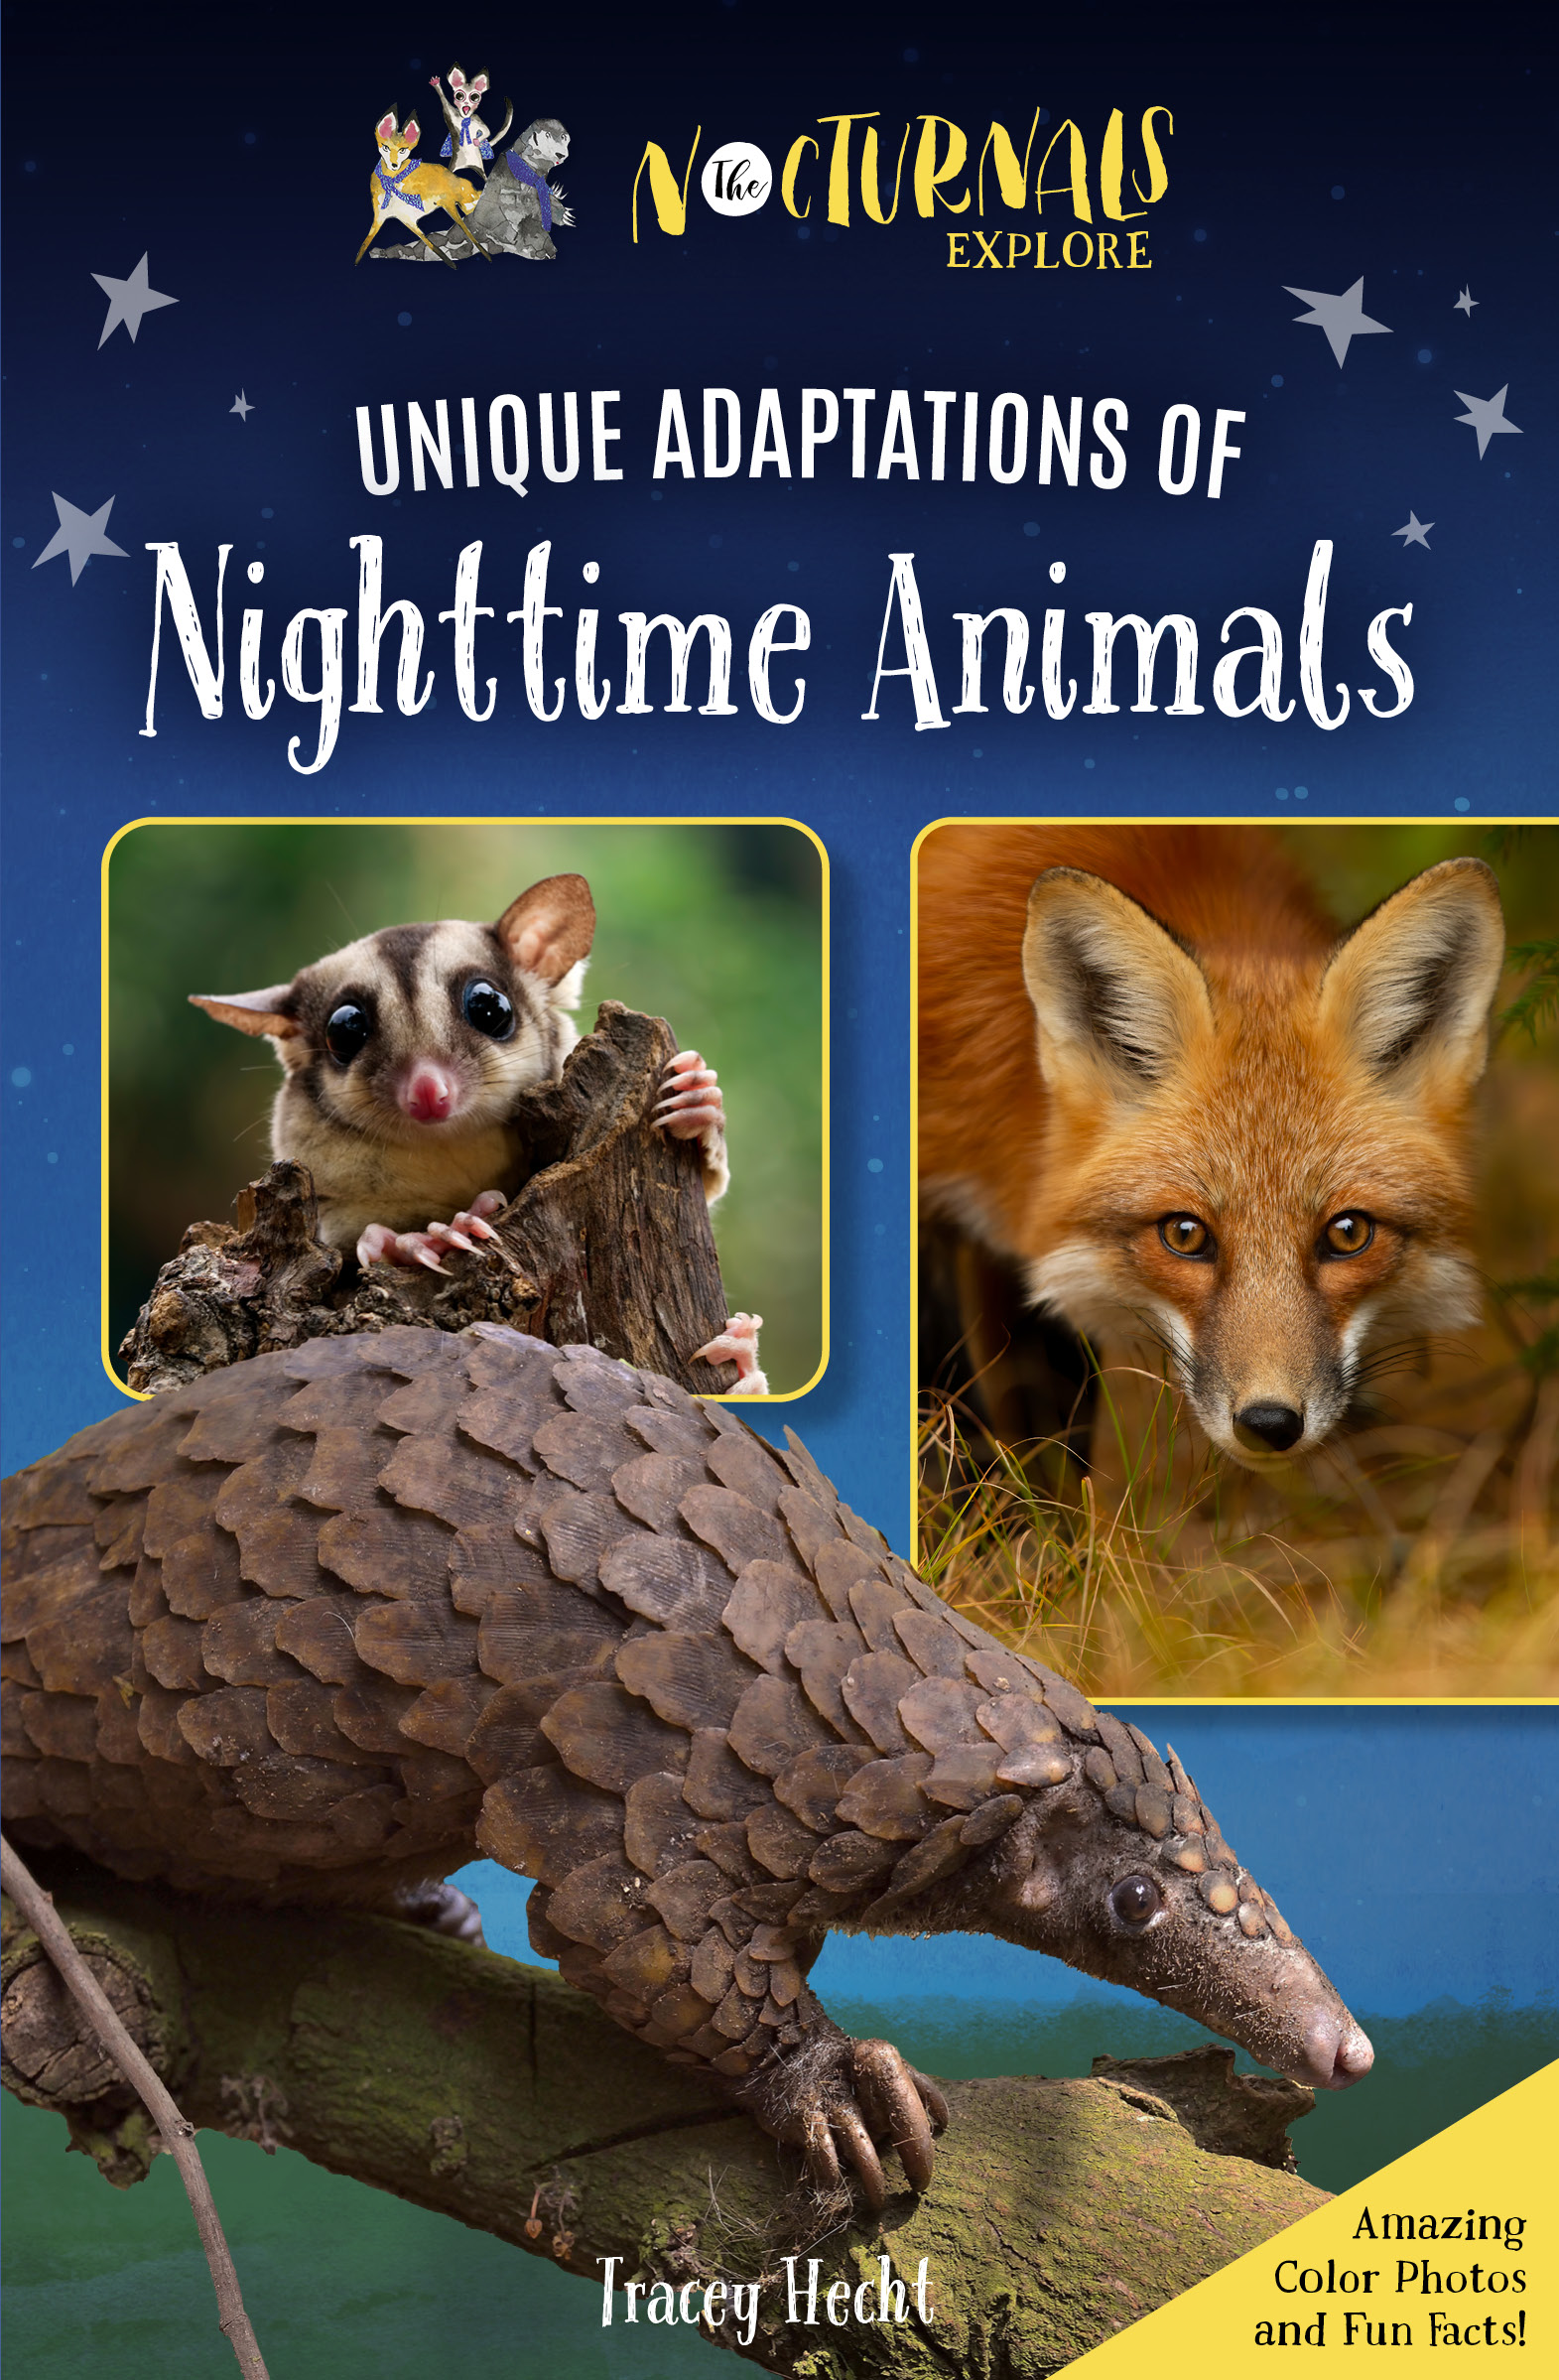 The Nocturnals Presents: Awesome Features and Surprising Adaptations